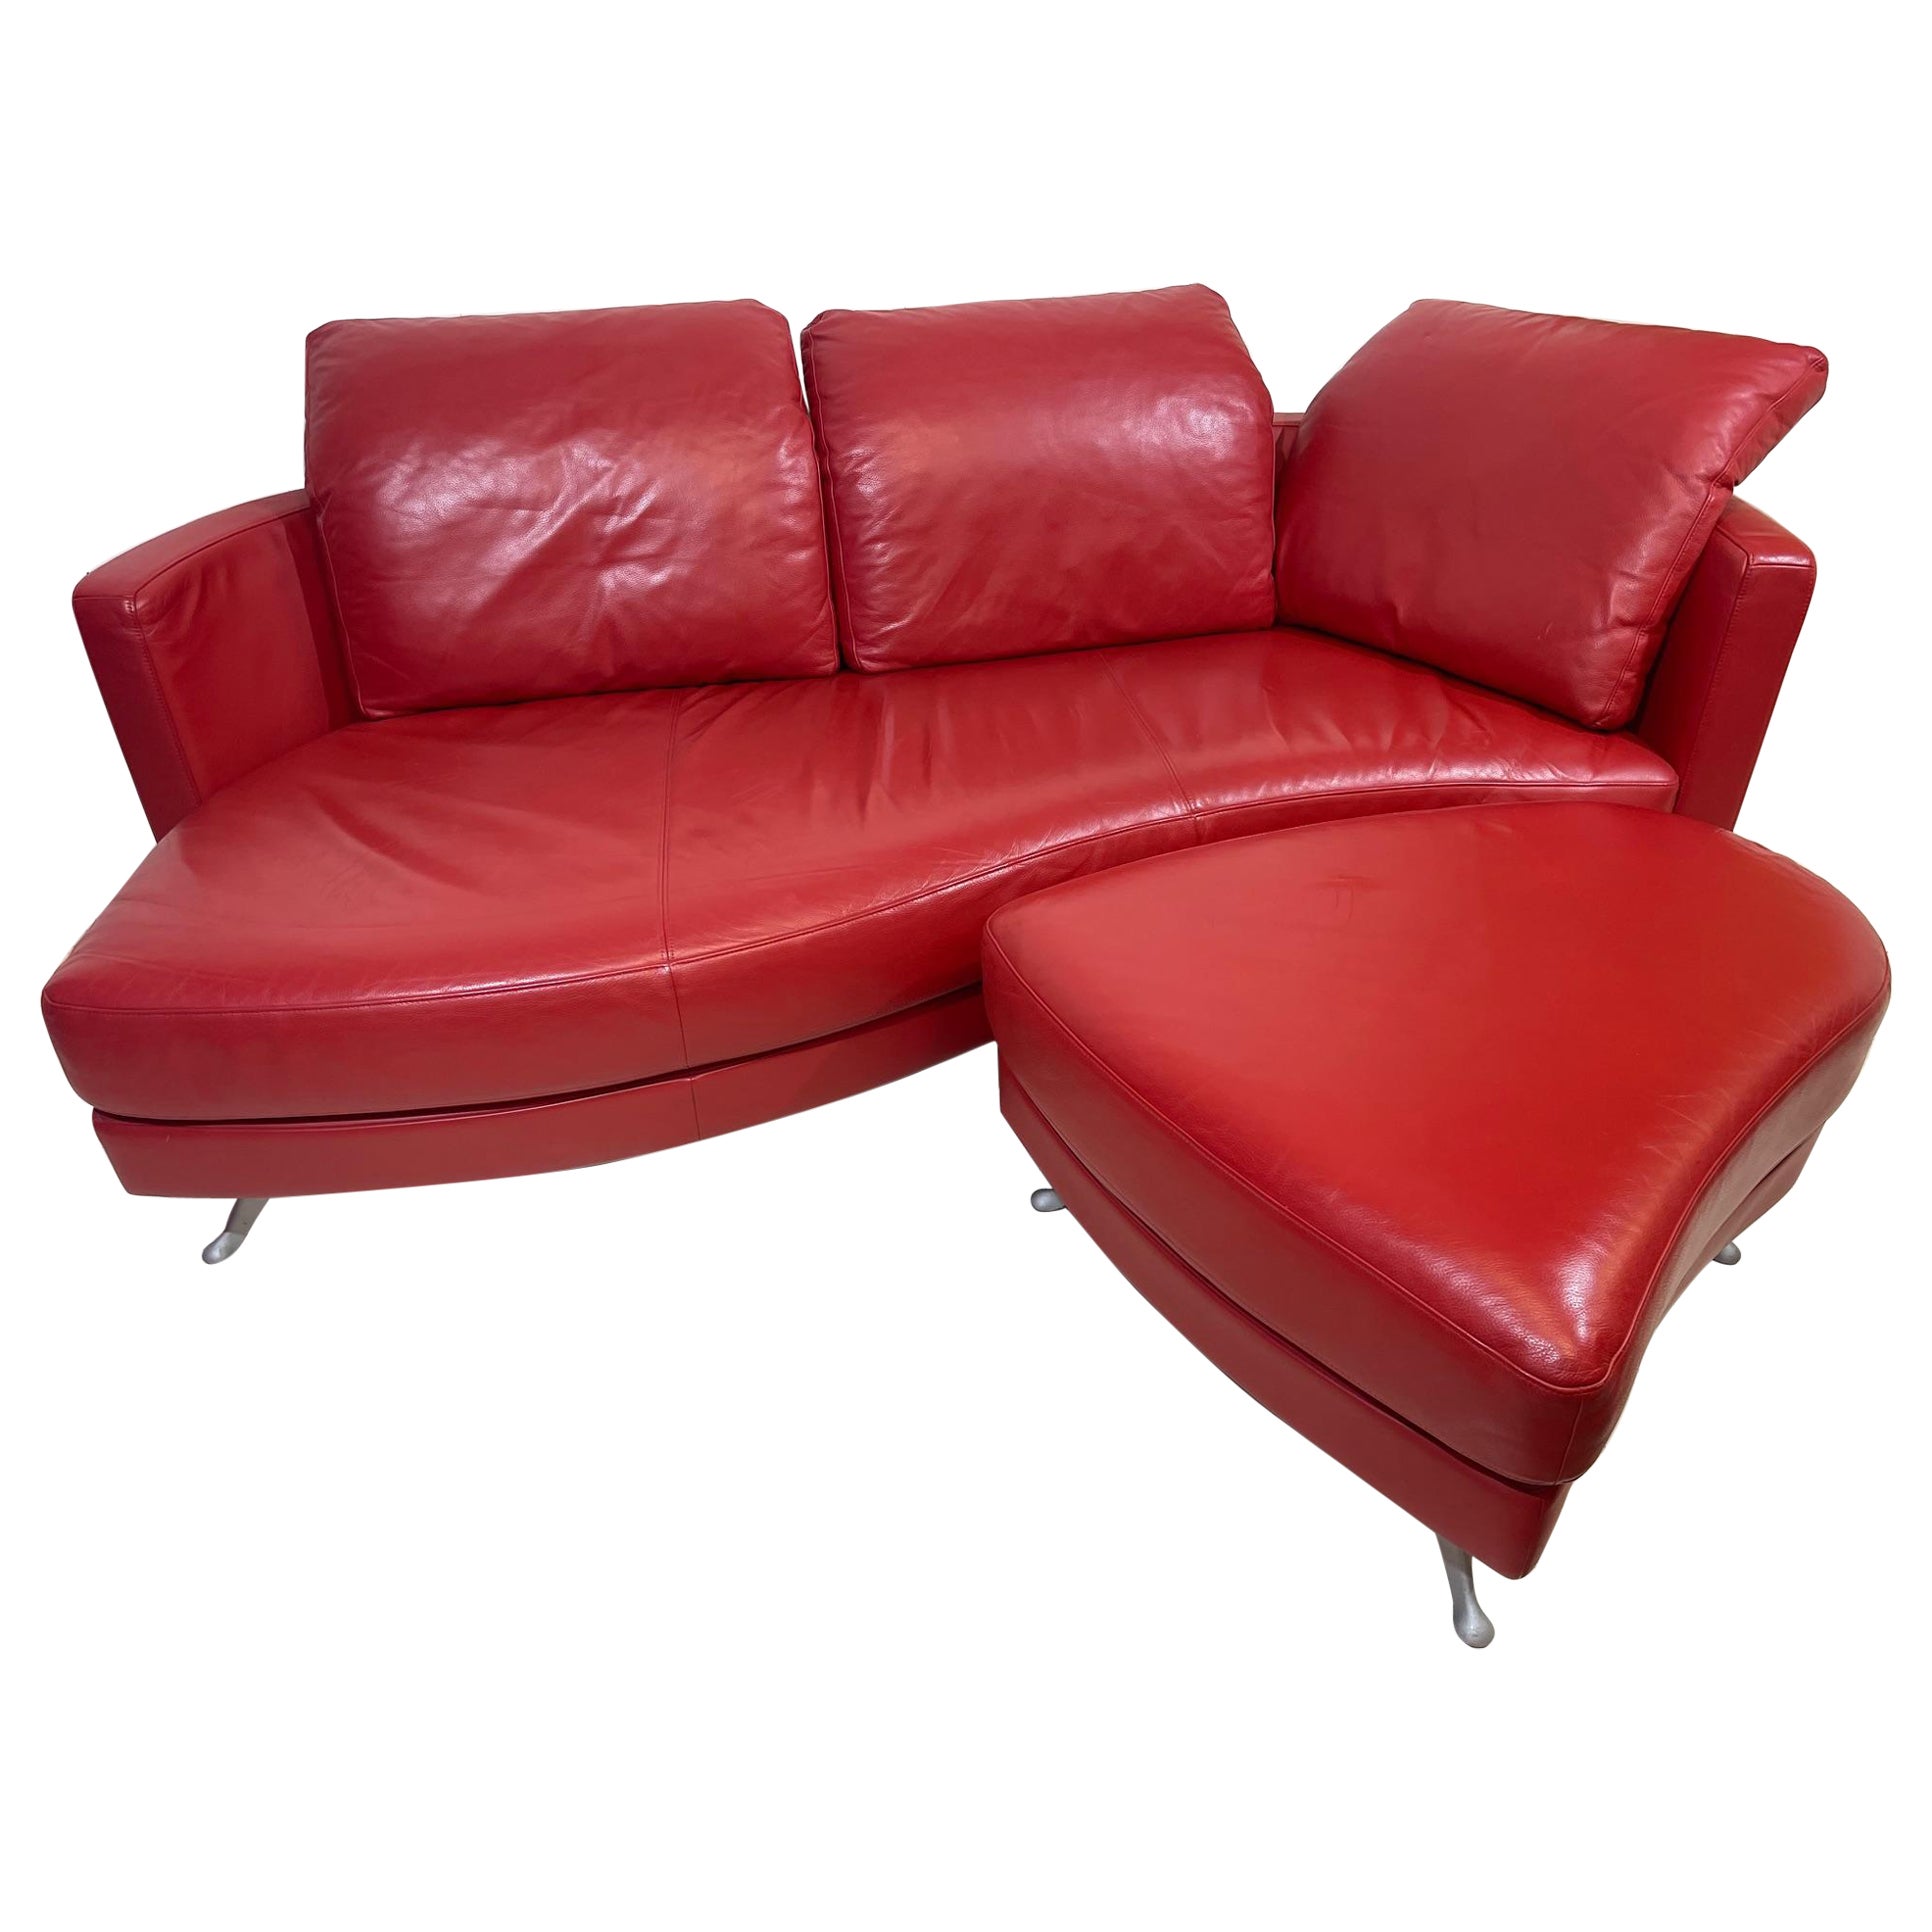 Contemporary Limited Edition Red Leather Sofa and Footstool Set by Rolf Benz For Sale